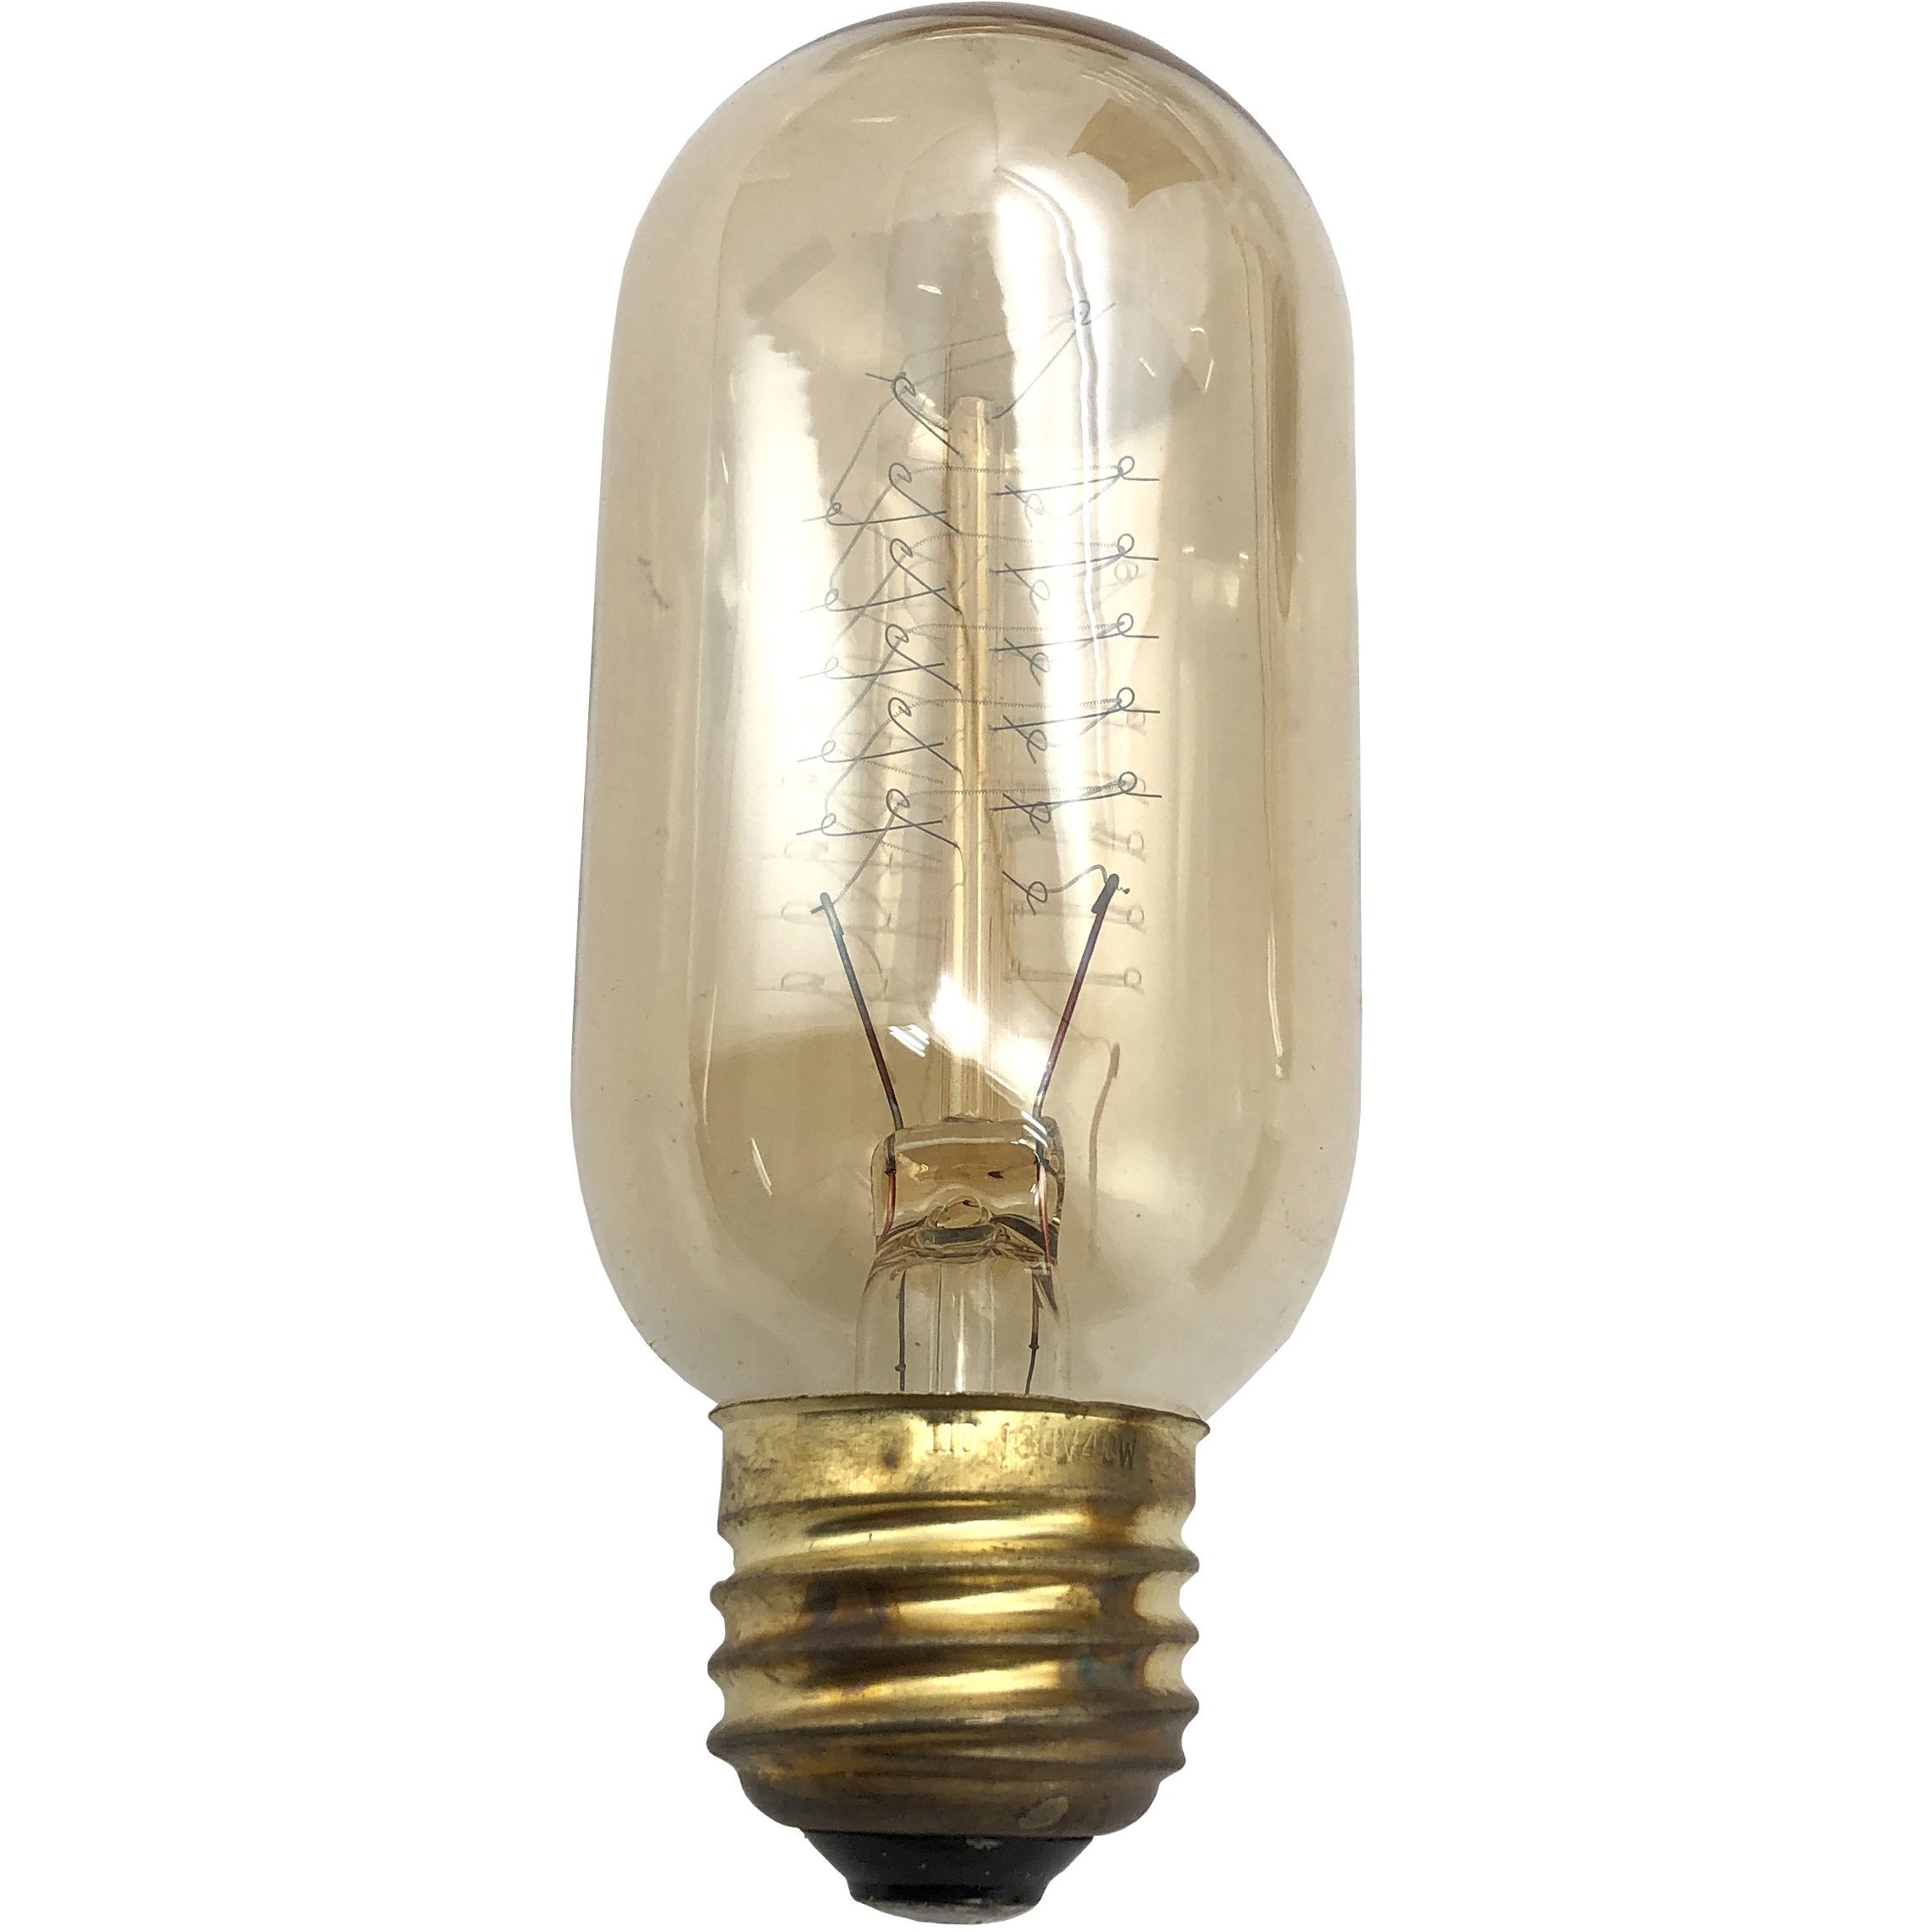 Sputnick 18 Bulb Chandellier / 9 Replacement Bulbs / Polished Nickel Finish